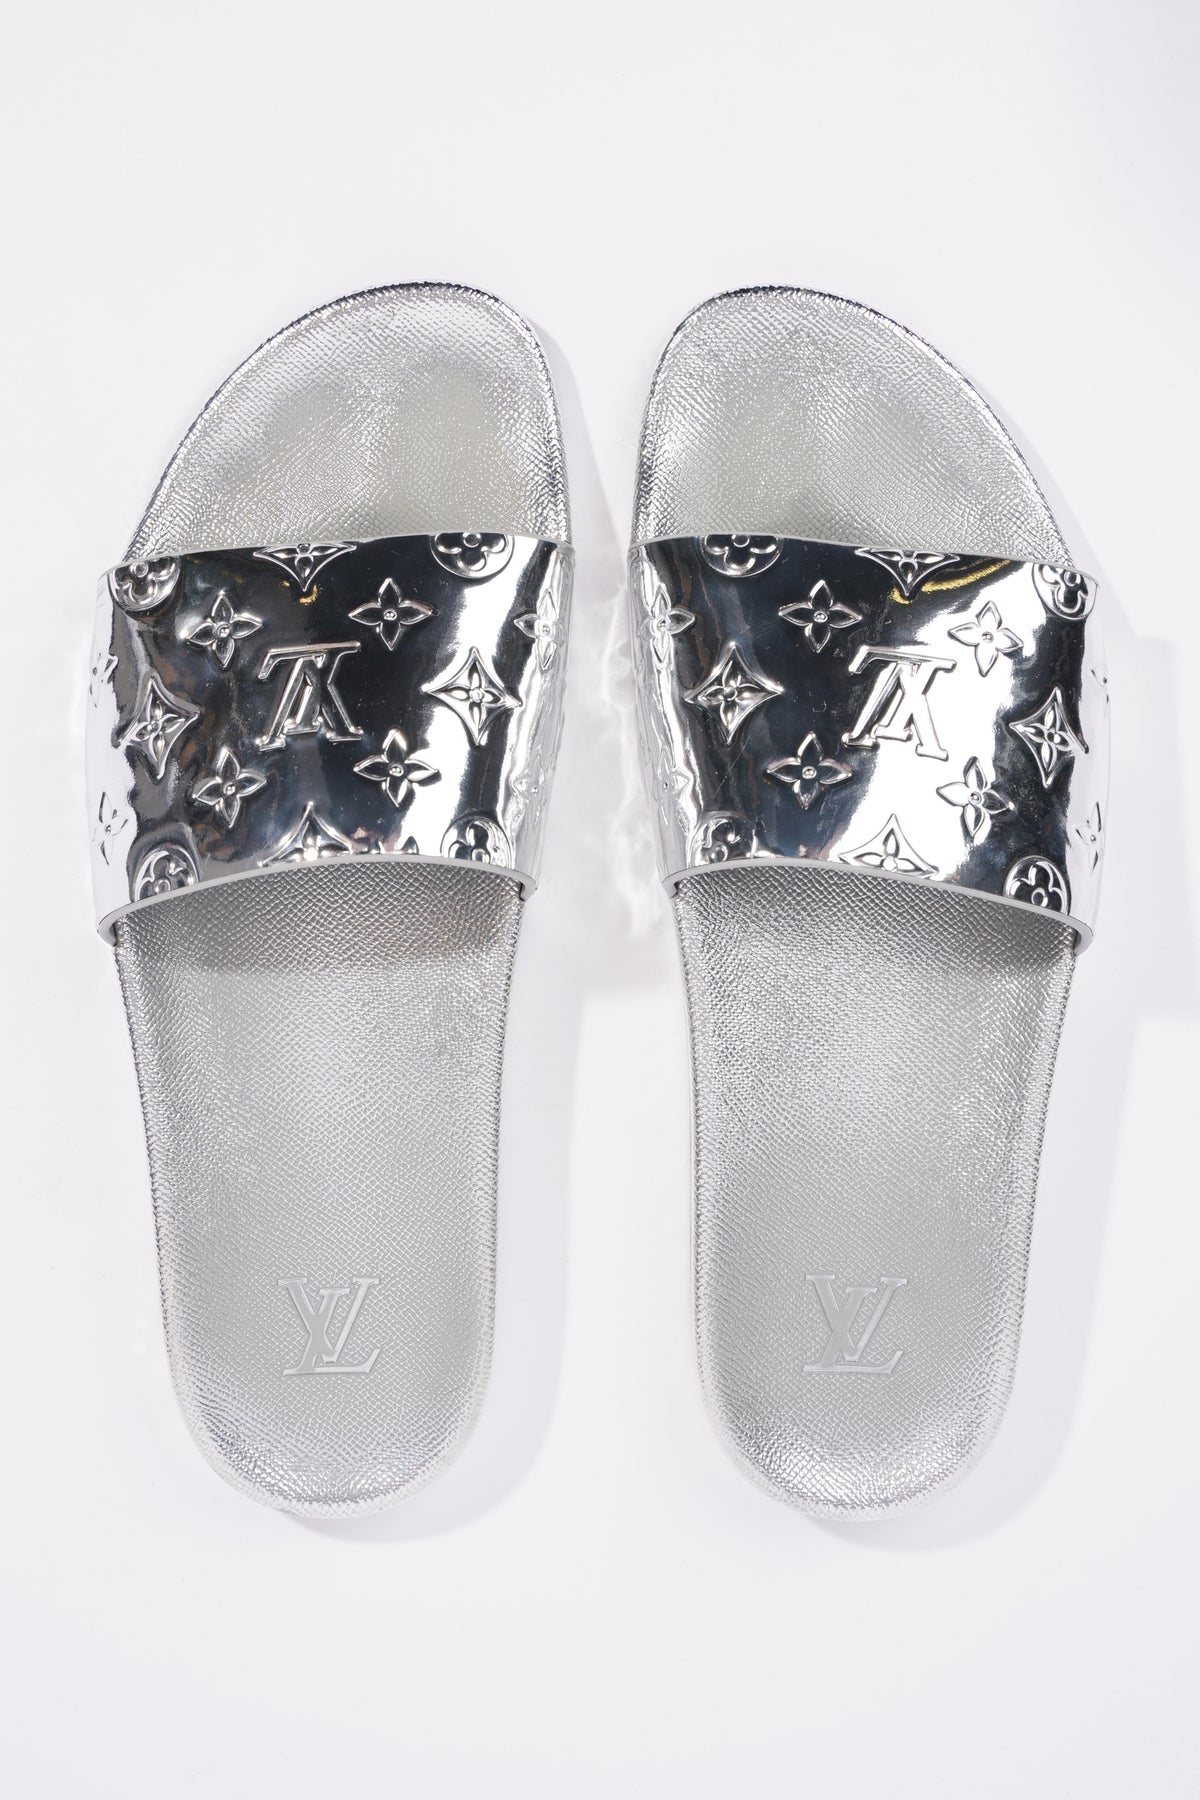 Size 10 Louis Vuitton WaterFront Mule Black Slides for Sale in South